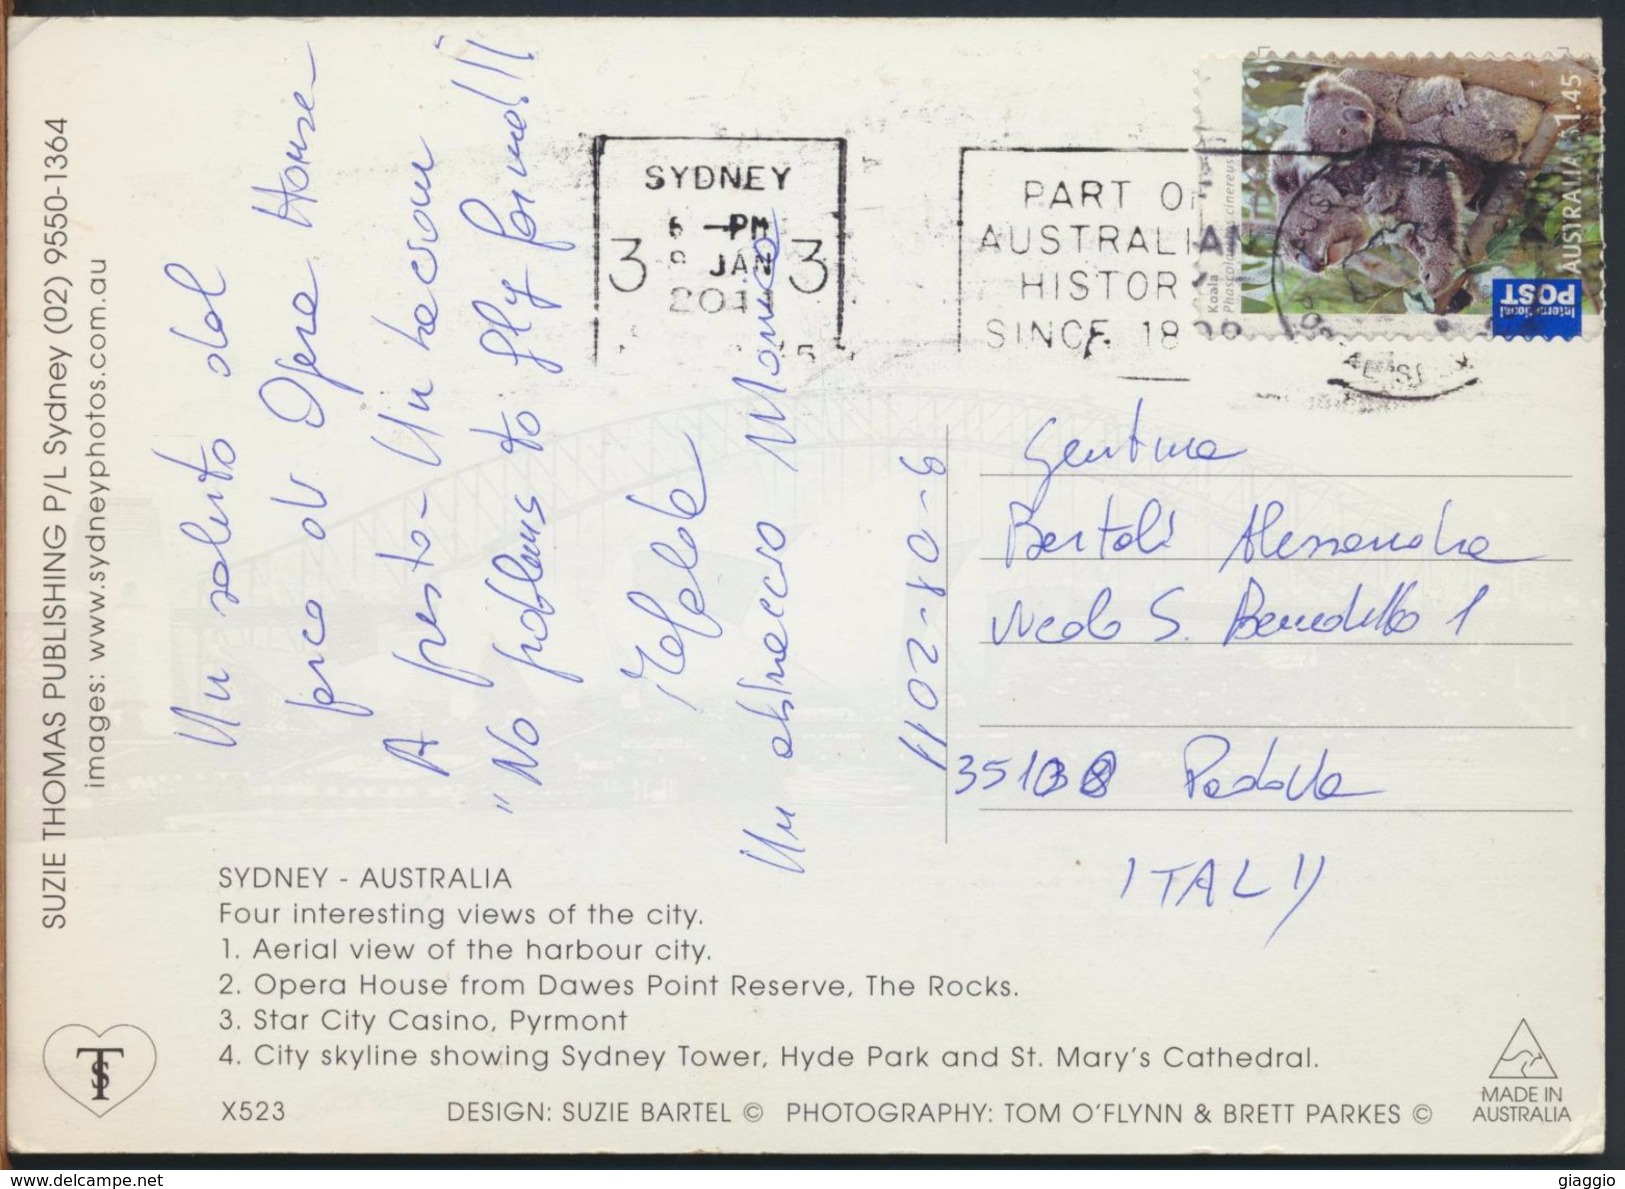 °°° 9770 - AUSTRALIA - SIDNEY - VIEWS OF THE CITY - With Stamps °°° - Sydney